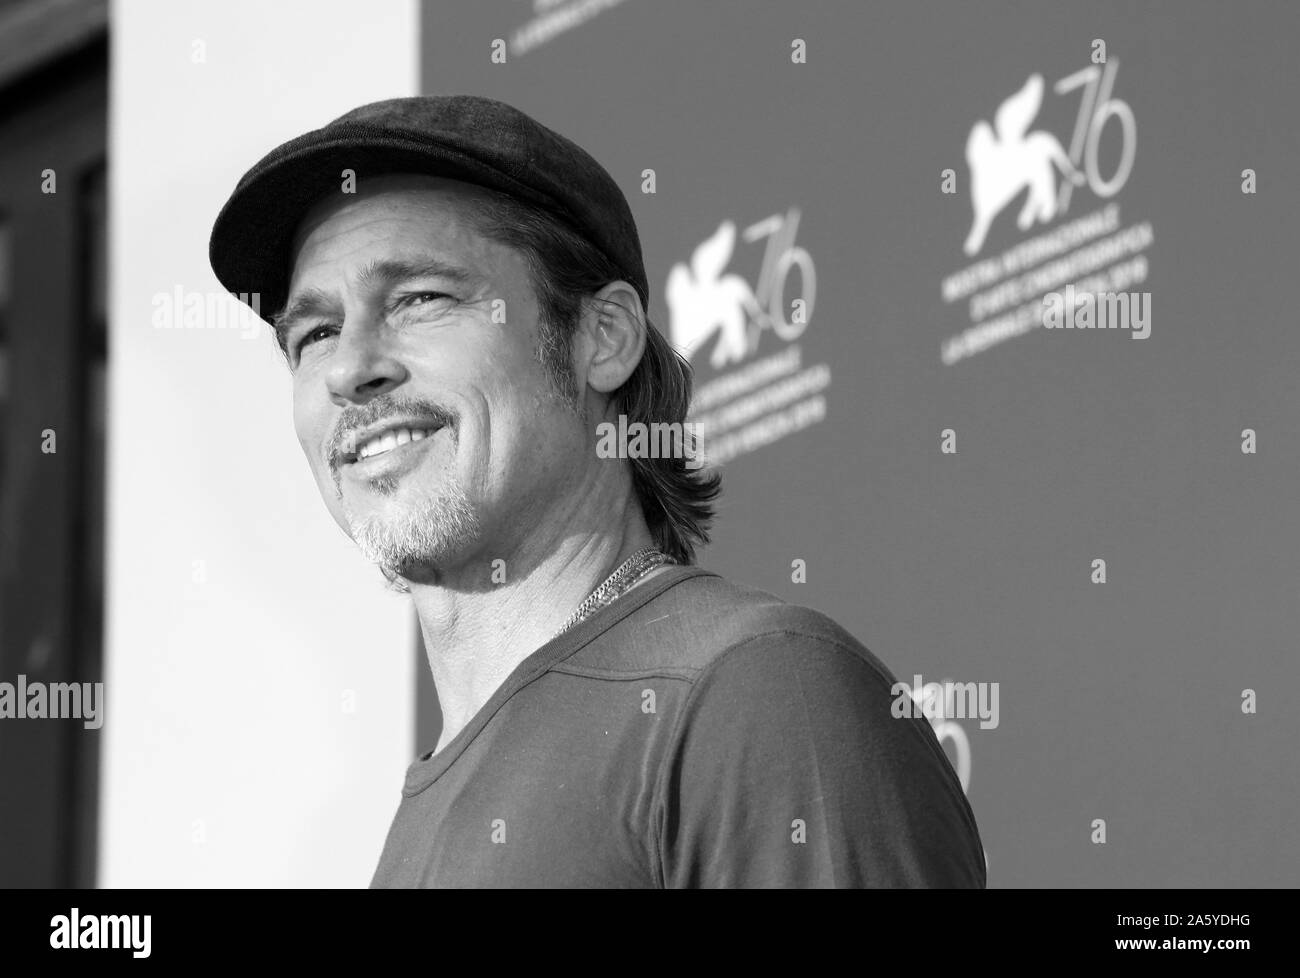 VENICE, ITALY - AUGUST 29,2019: Brad Pitt attends "Ad Astra" photocall during the 76th Venice Film Festival on August 29, 2019 in Venice, Italy Stock Photo